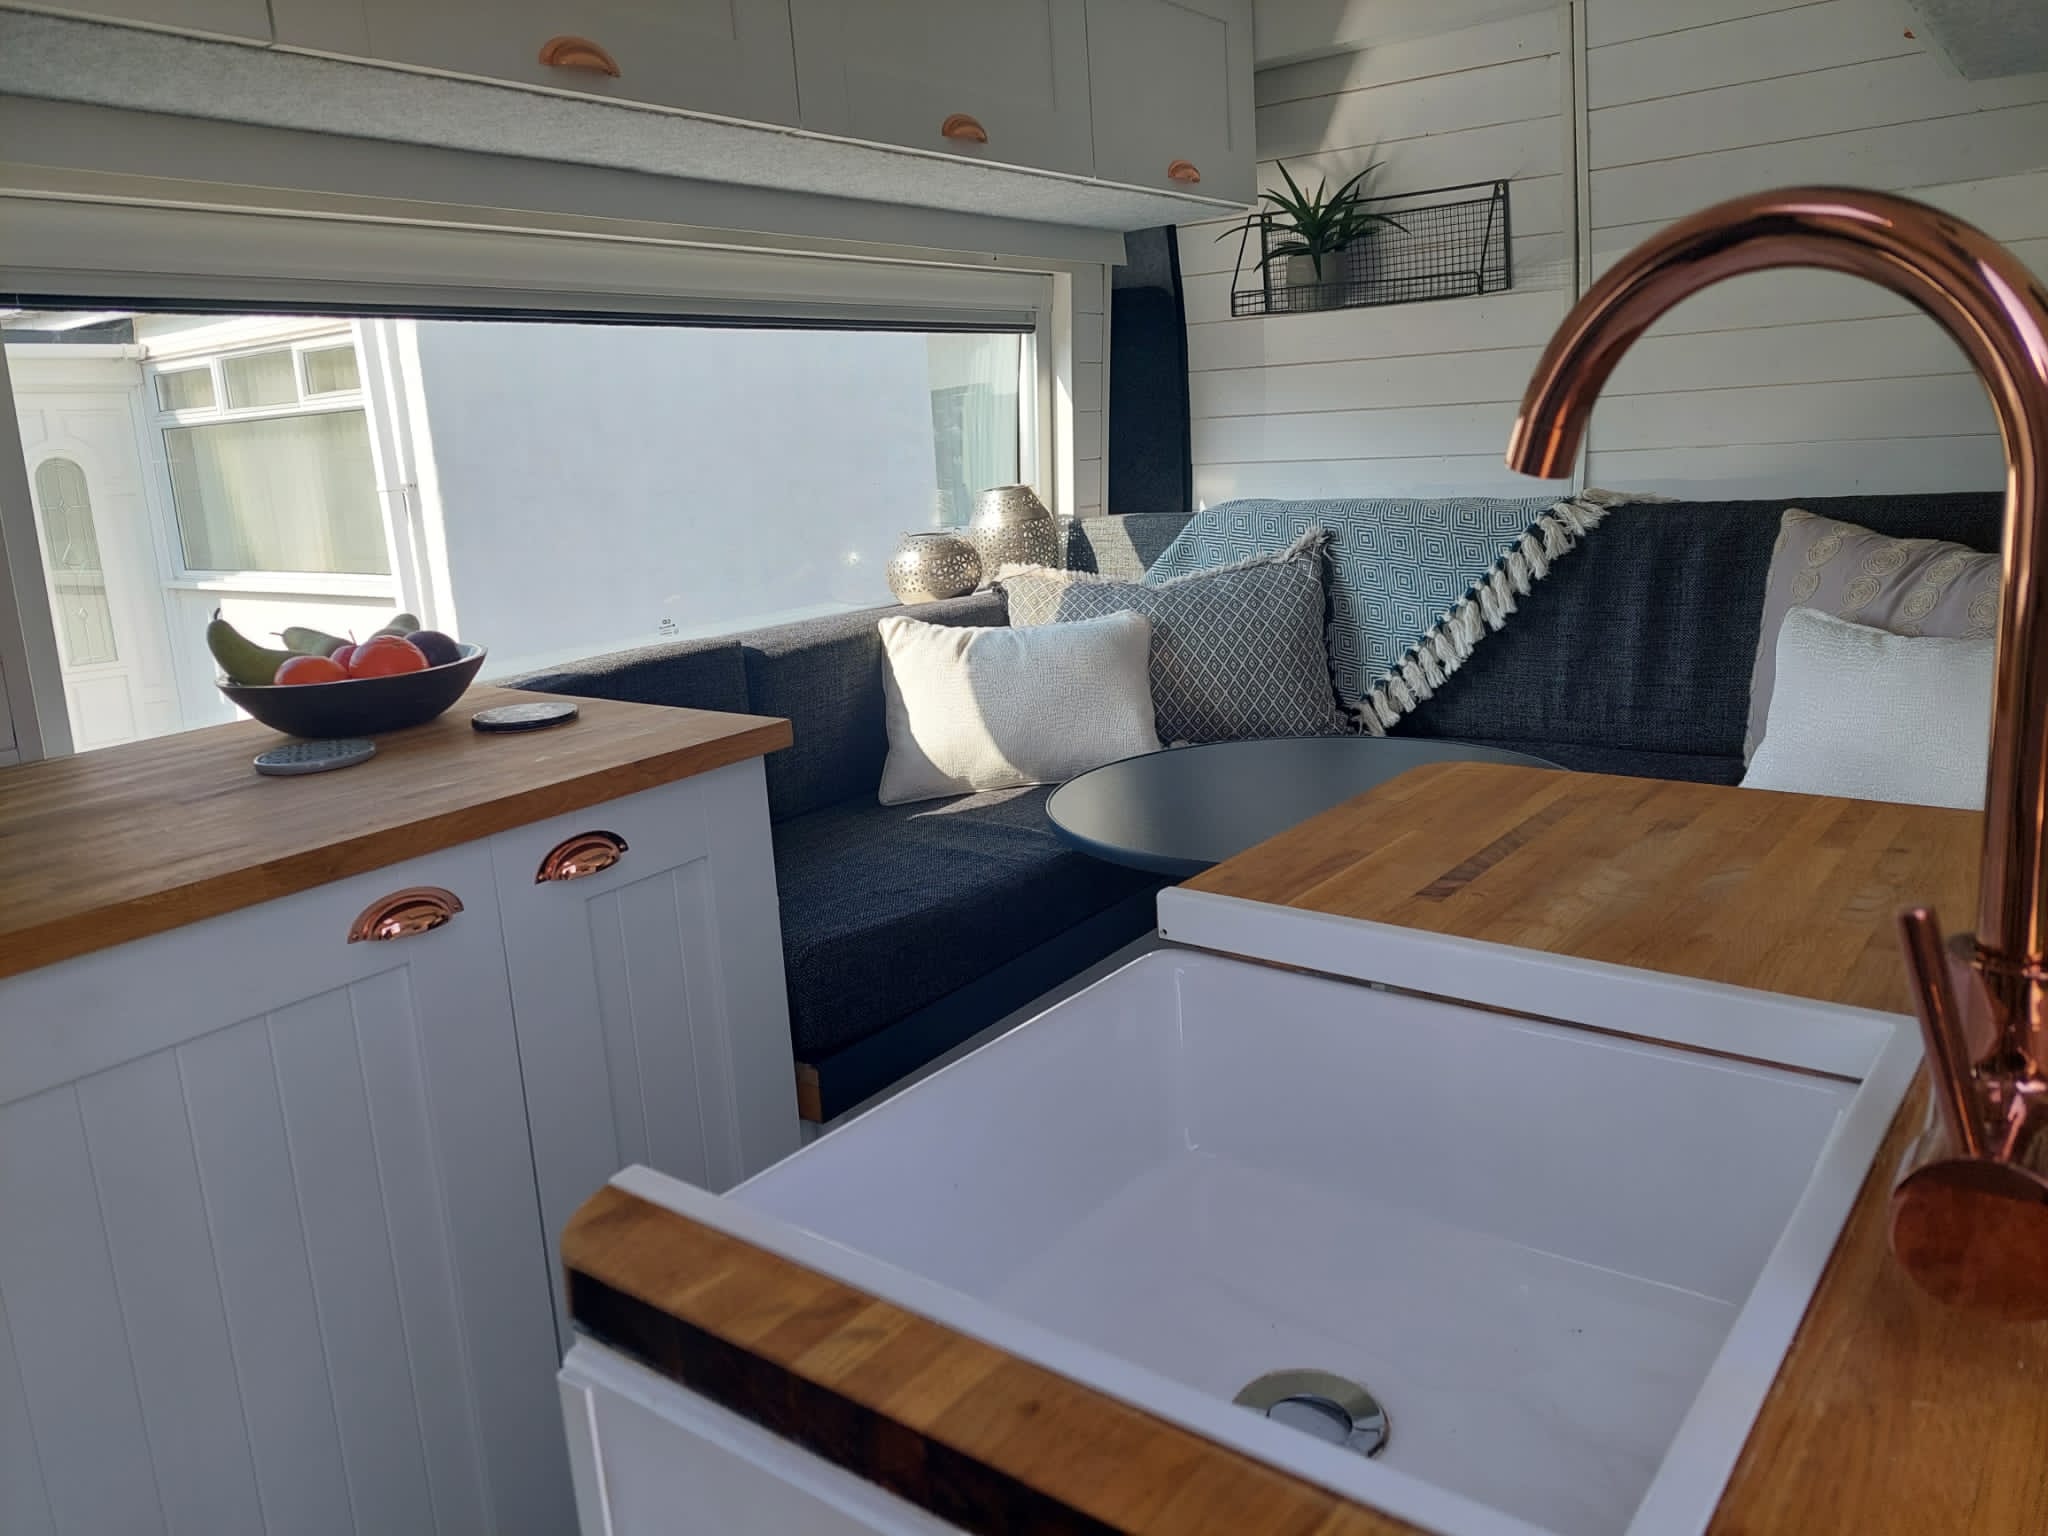 A cozy RV interior featuring a white kitchen with a wooden countertop and a copper faucet. A white sink is in the forefront. The seating area includes gray and blue cushions, a small round table, and a wooden bench. A large window brings in natural light, and a plant decorates the back wall.